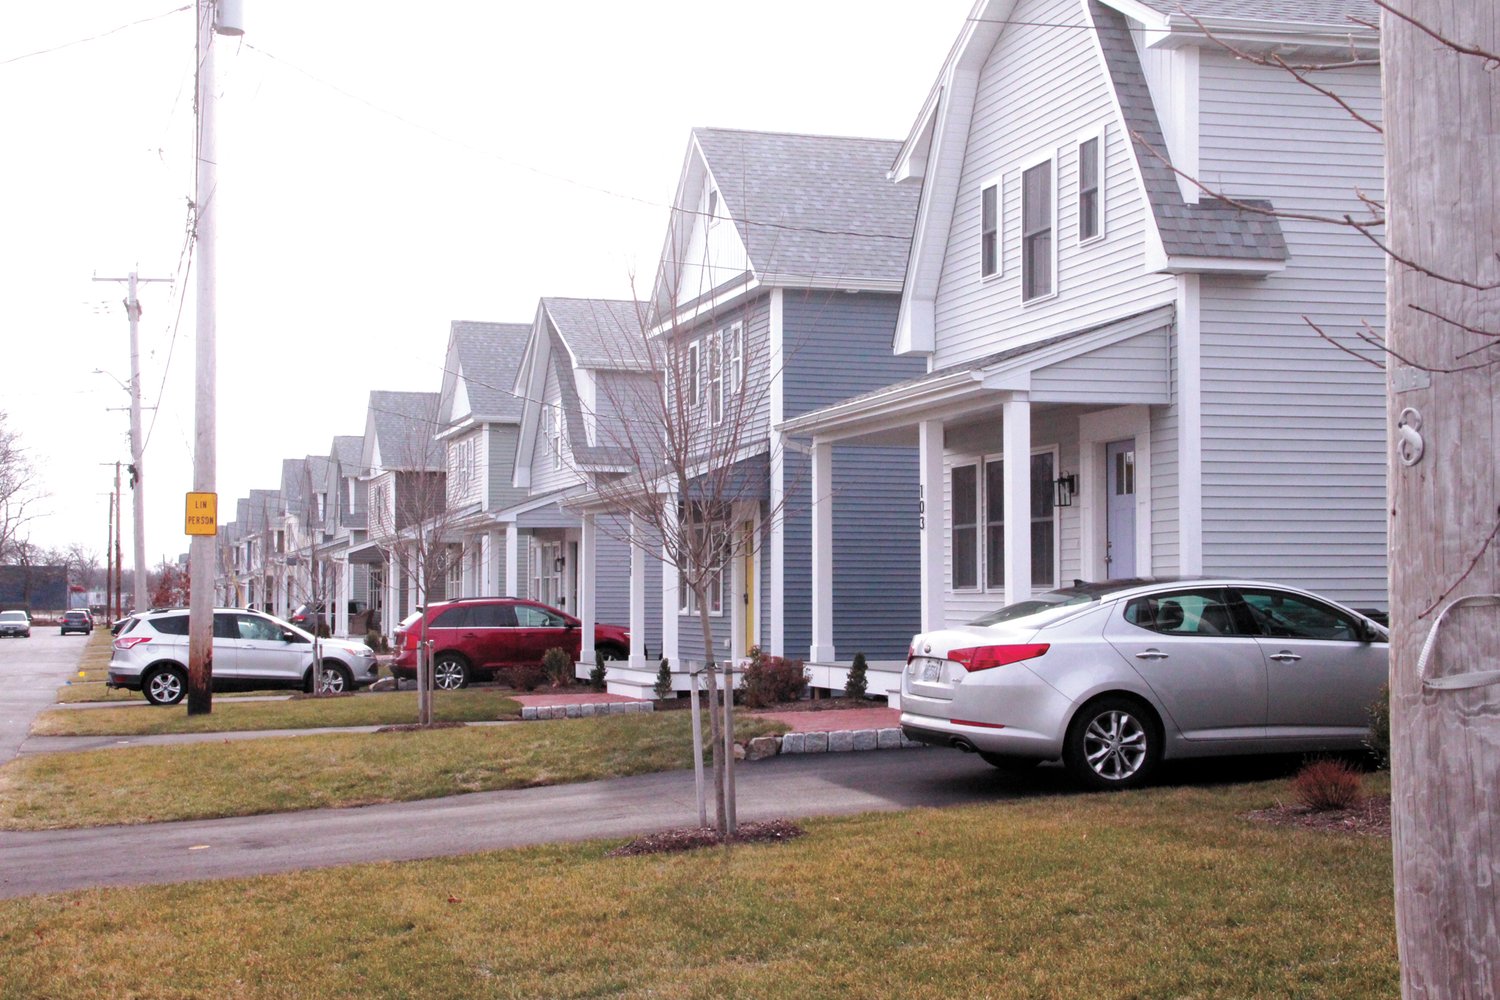 ROW OF CONDOS: The 19 single-family condos, with units selling in the range of $400,000, is the first phase of 75 condos on Graystone and Kilvert Streets. The remaining units will be part of townhouses on Kilvert Street. (Warwick Beacon photo)